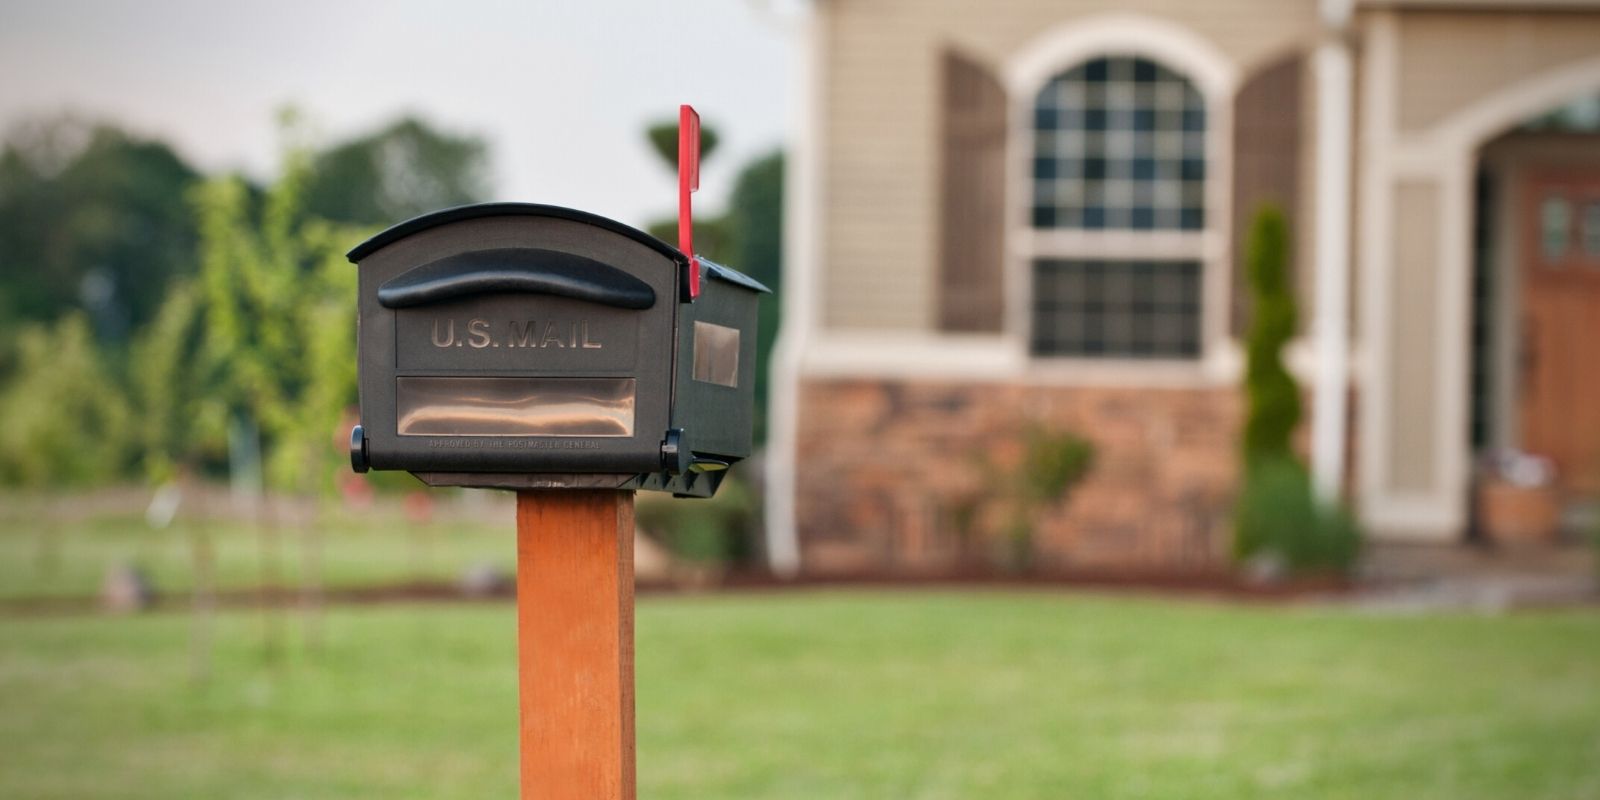 8. Replace Your Old Mailbox